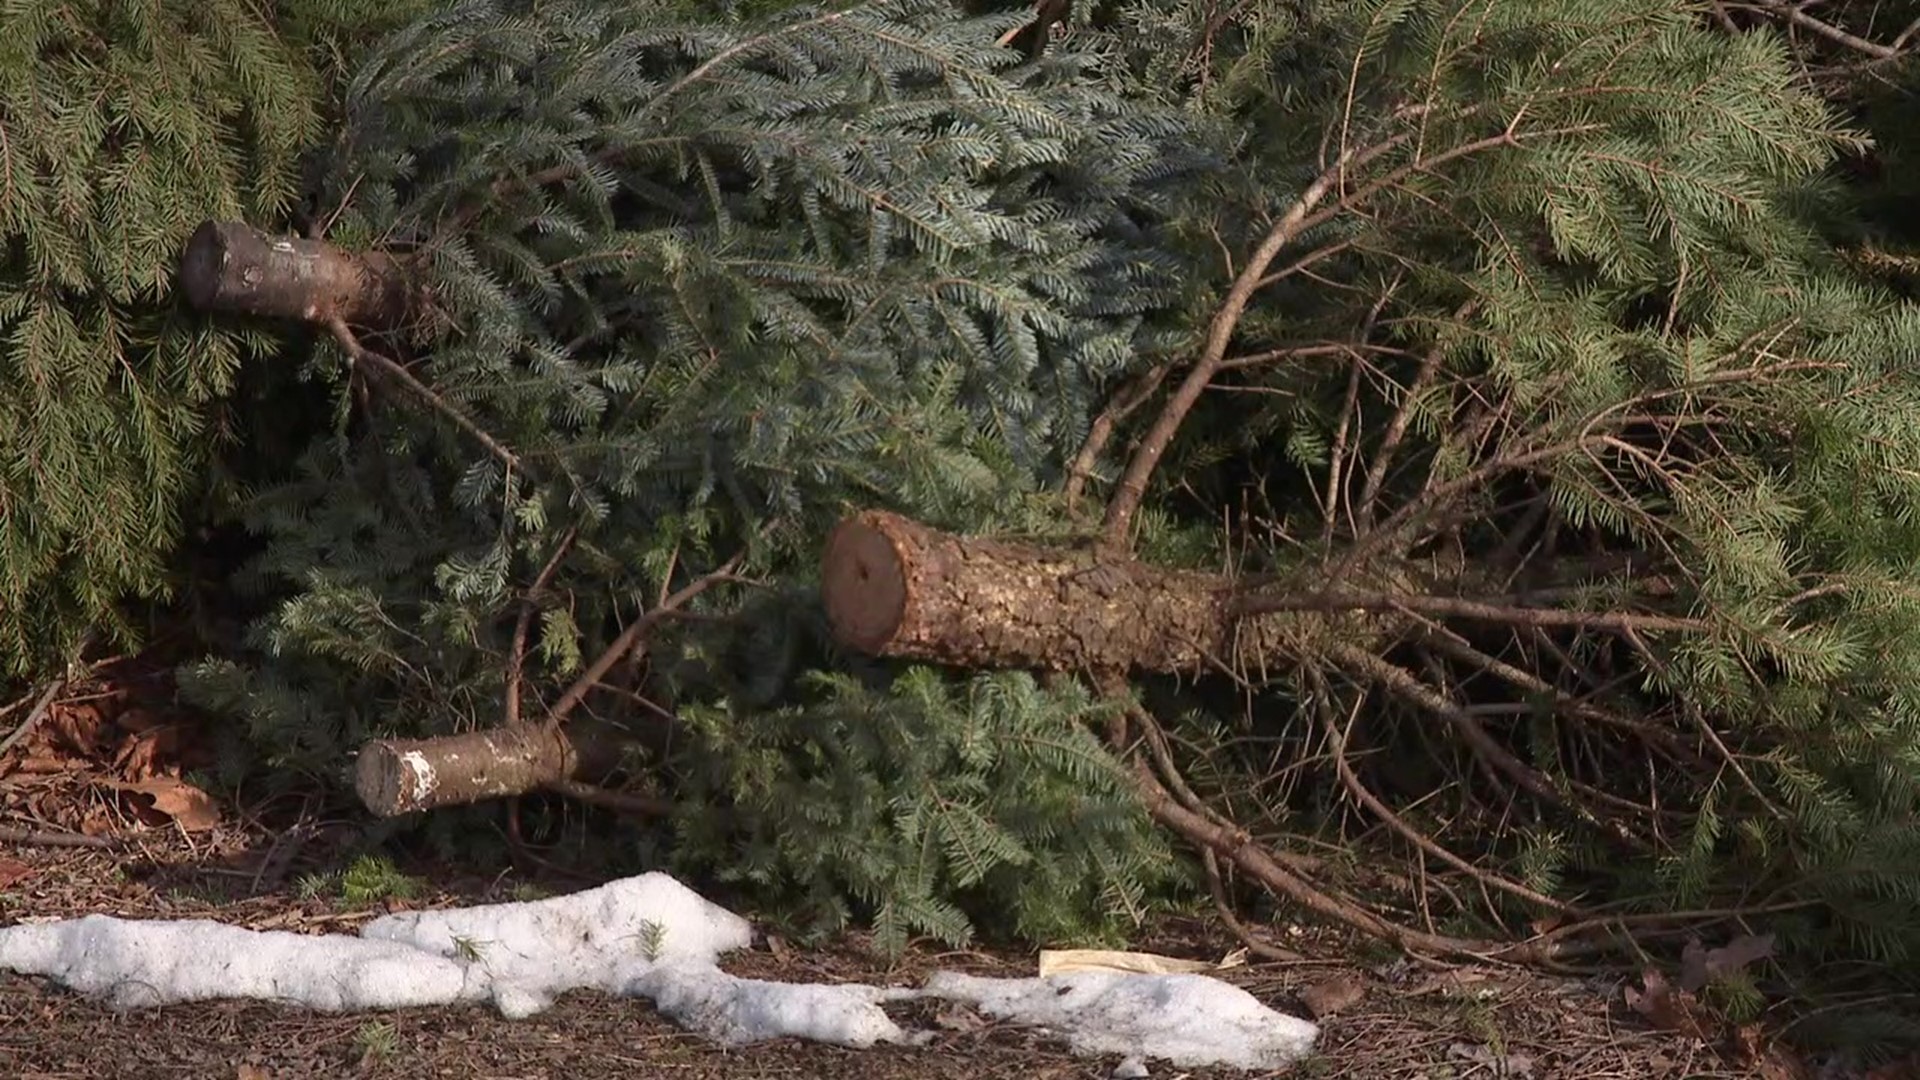 Now that the holiday season is over, you might find yourself tossing your Christmas tree to the curb. But before you send out your spruce, consider donating it.